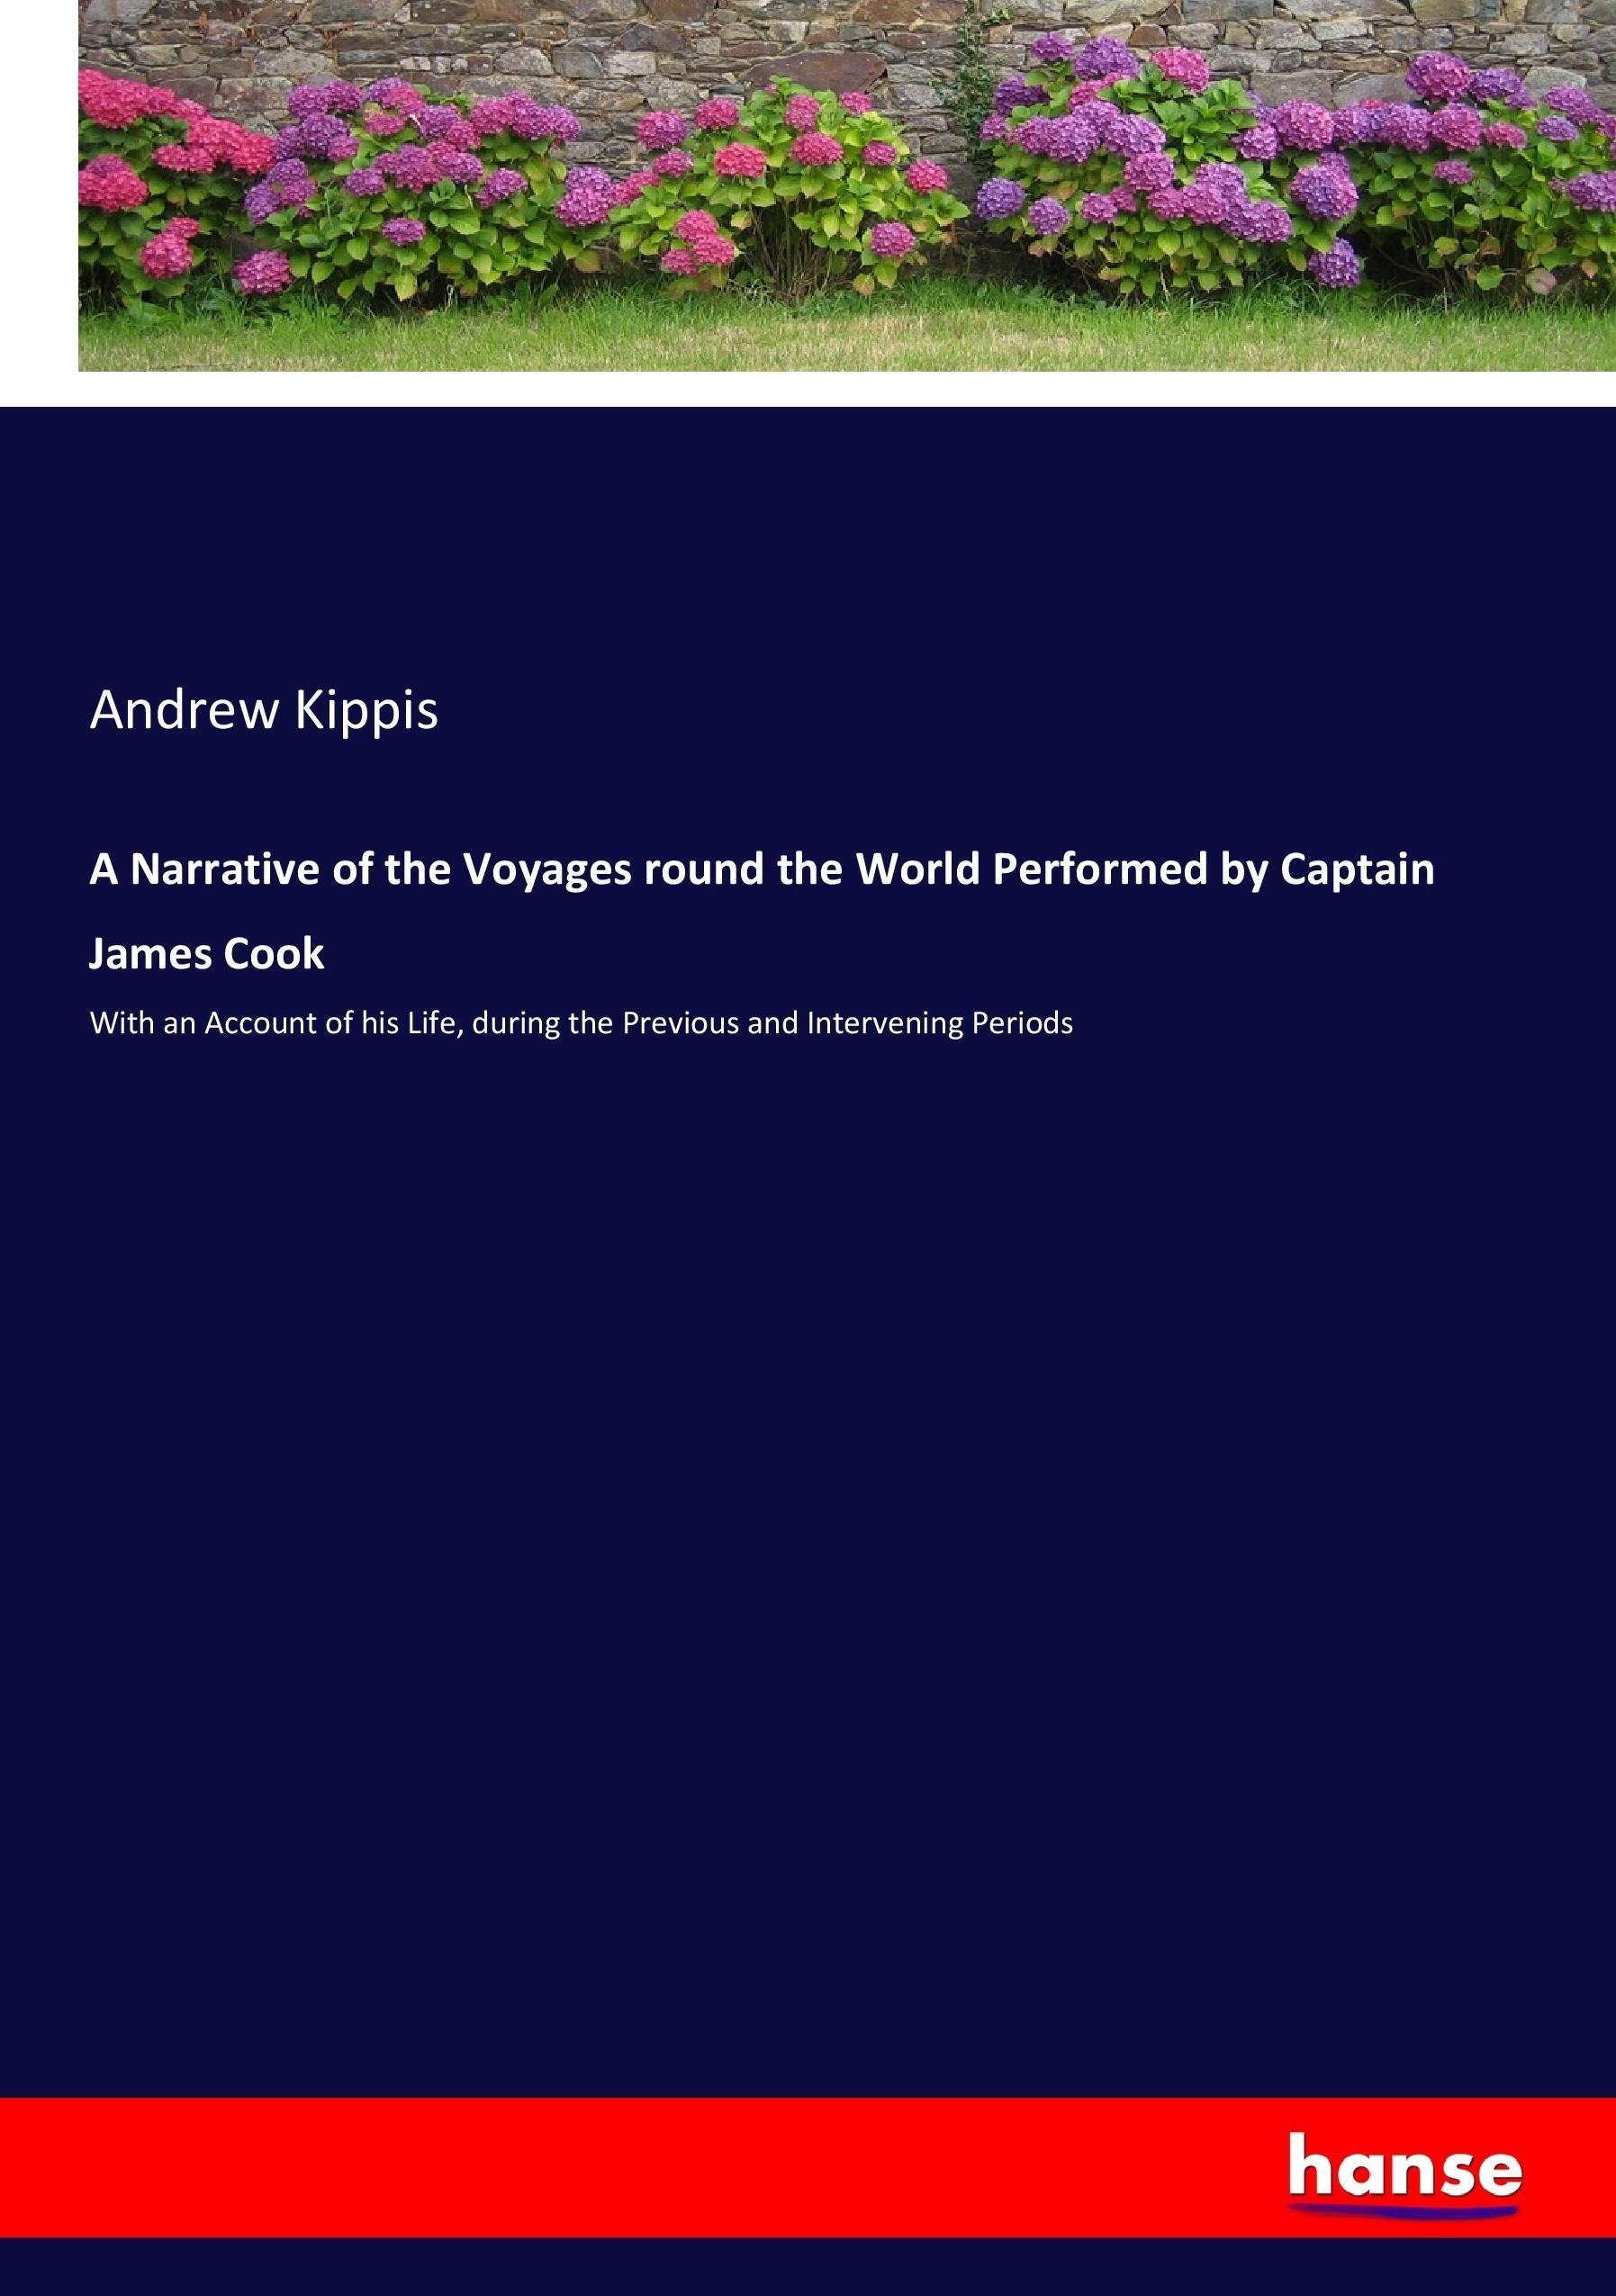 A Narrative of the Voyages round the World Performed by Captain James Cook | With an Account of his Life, during the Previous and Intervening Periods | Andrew Kippis | Taschenbuch | Paperback | 448 S. - Kippis, Andrew